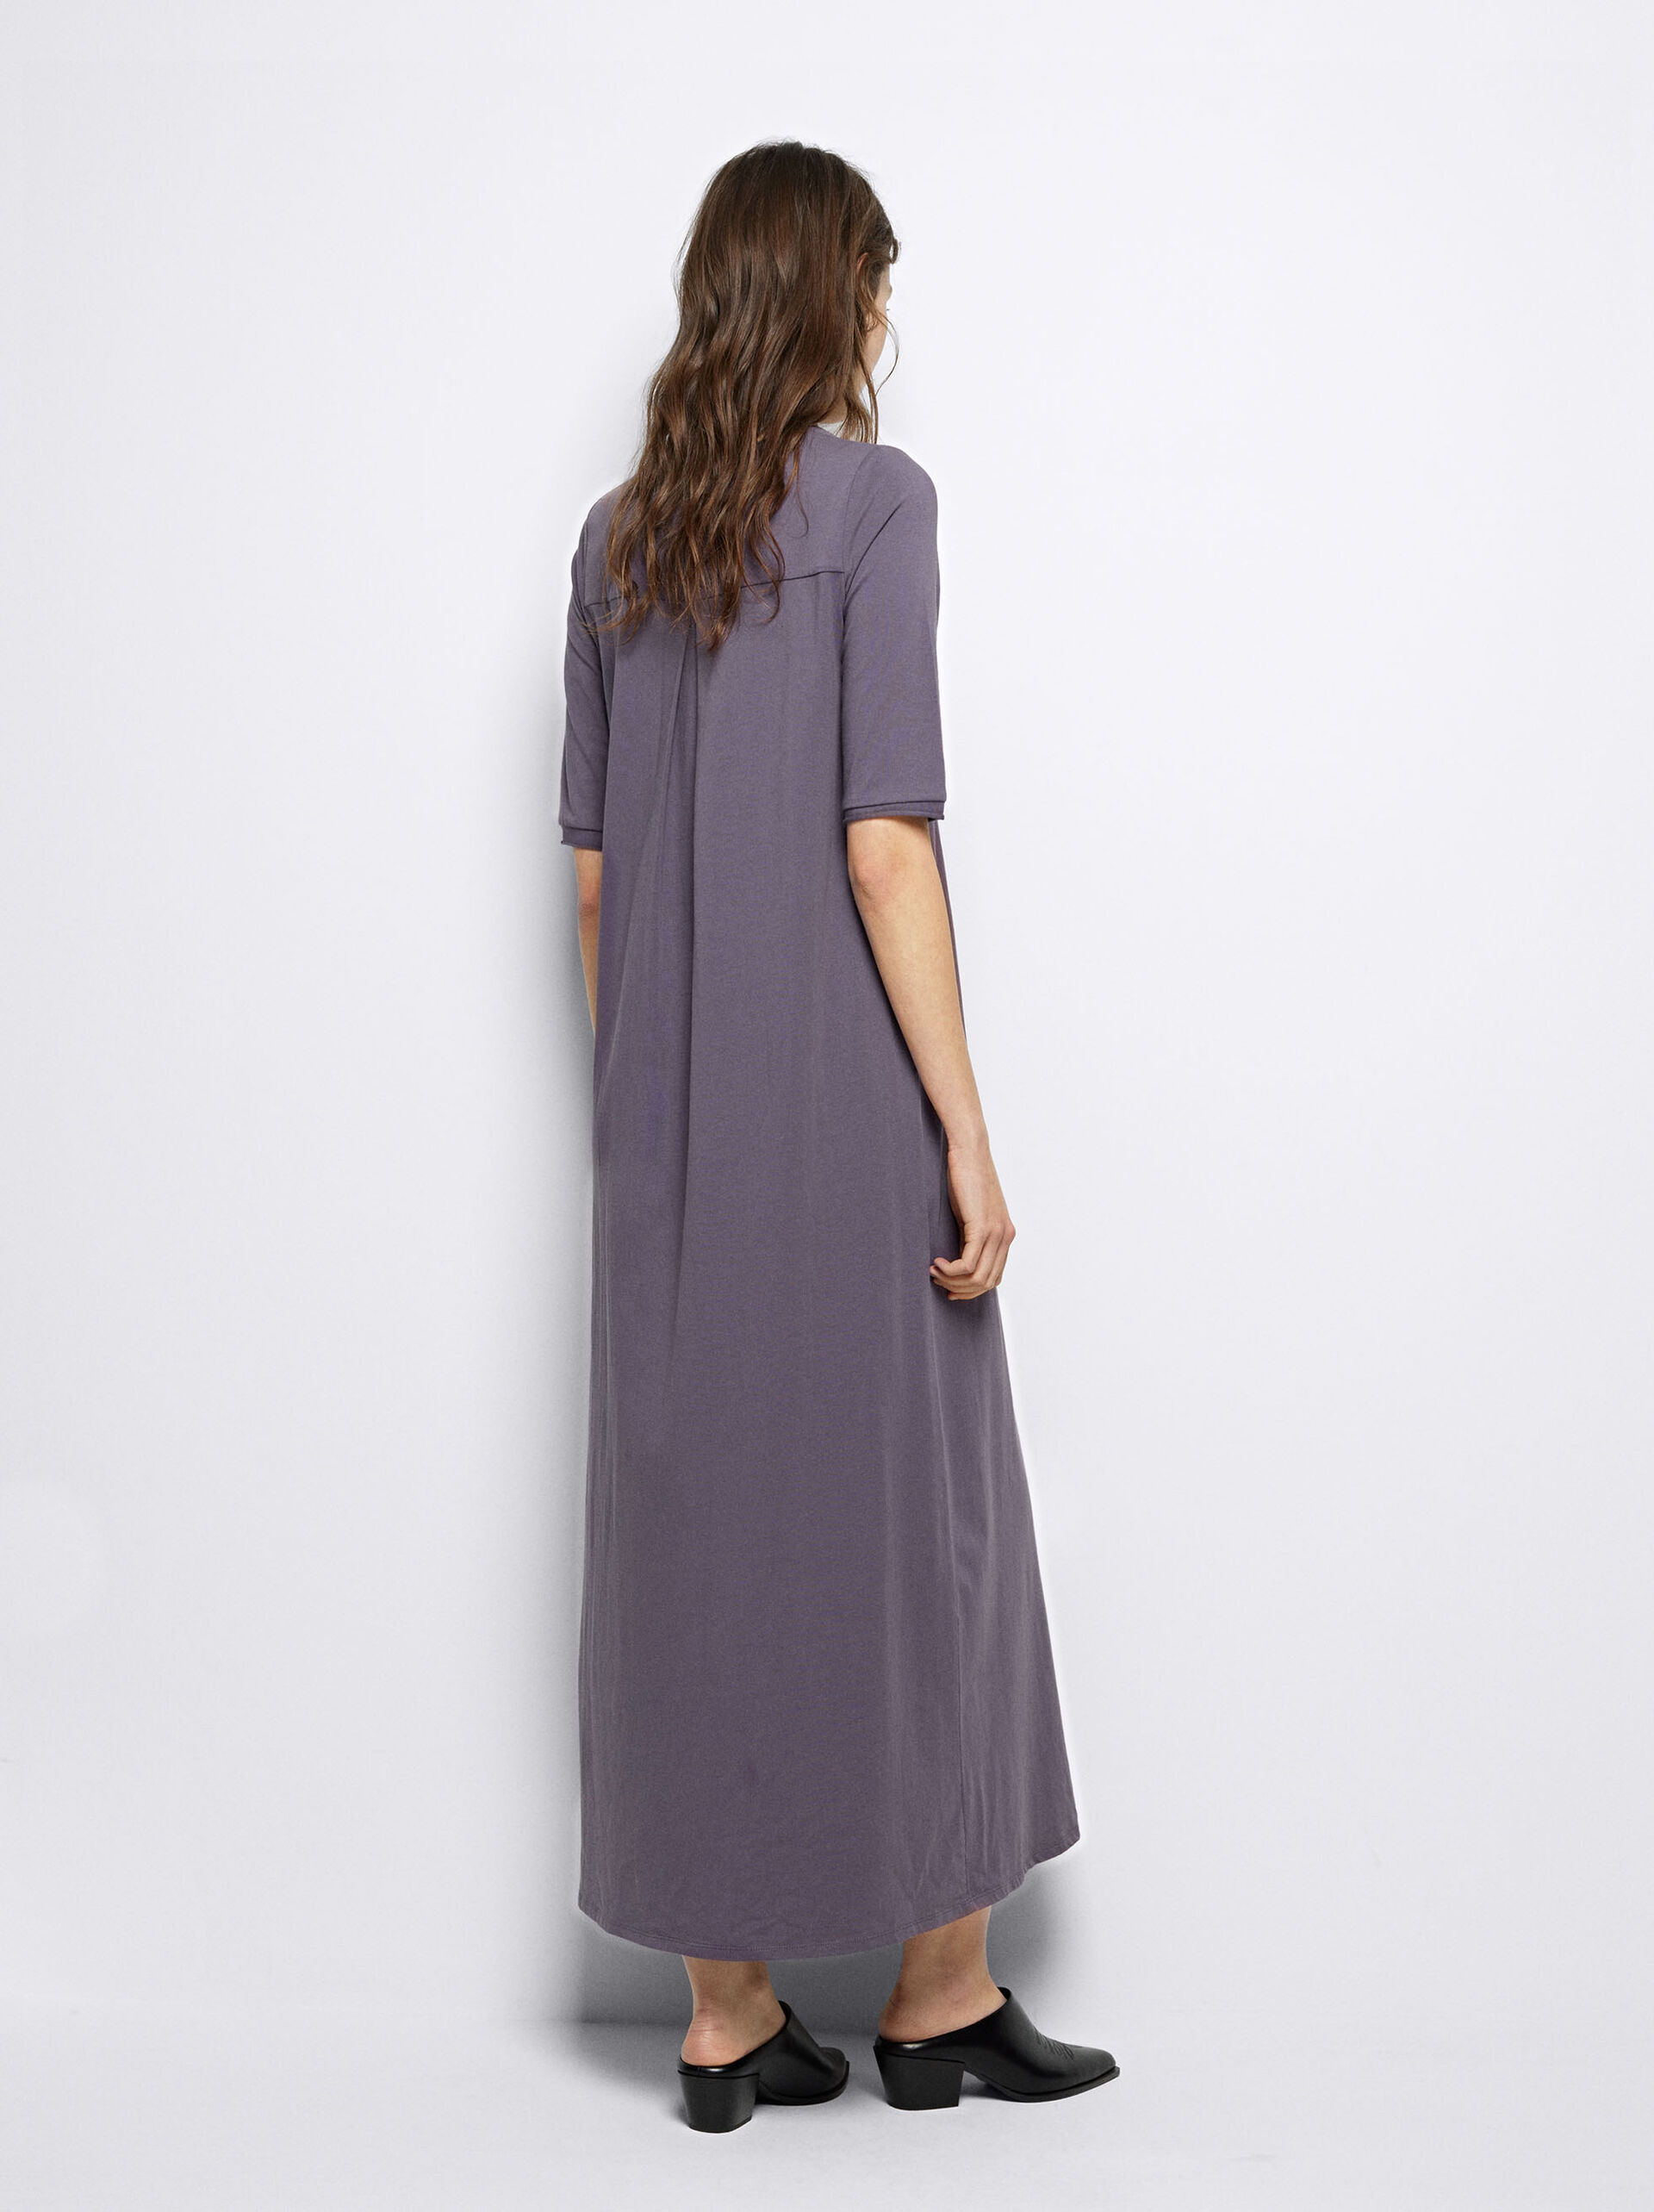 Flowy Cotton Dress image number 3.0